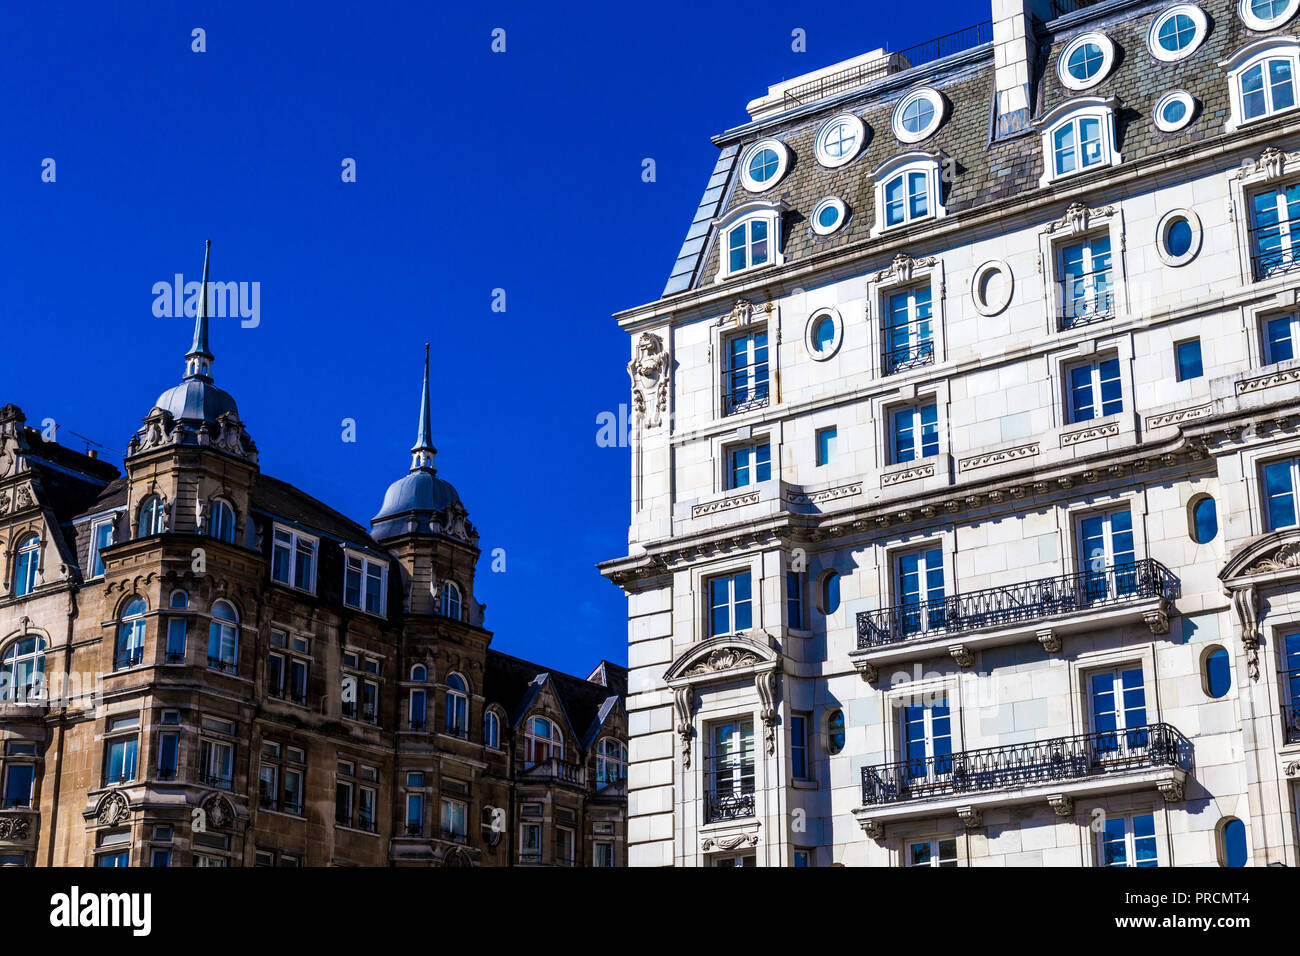 Facades of old townhouses in Hanover Square, London, UK Stock Photo